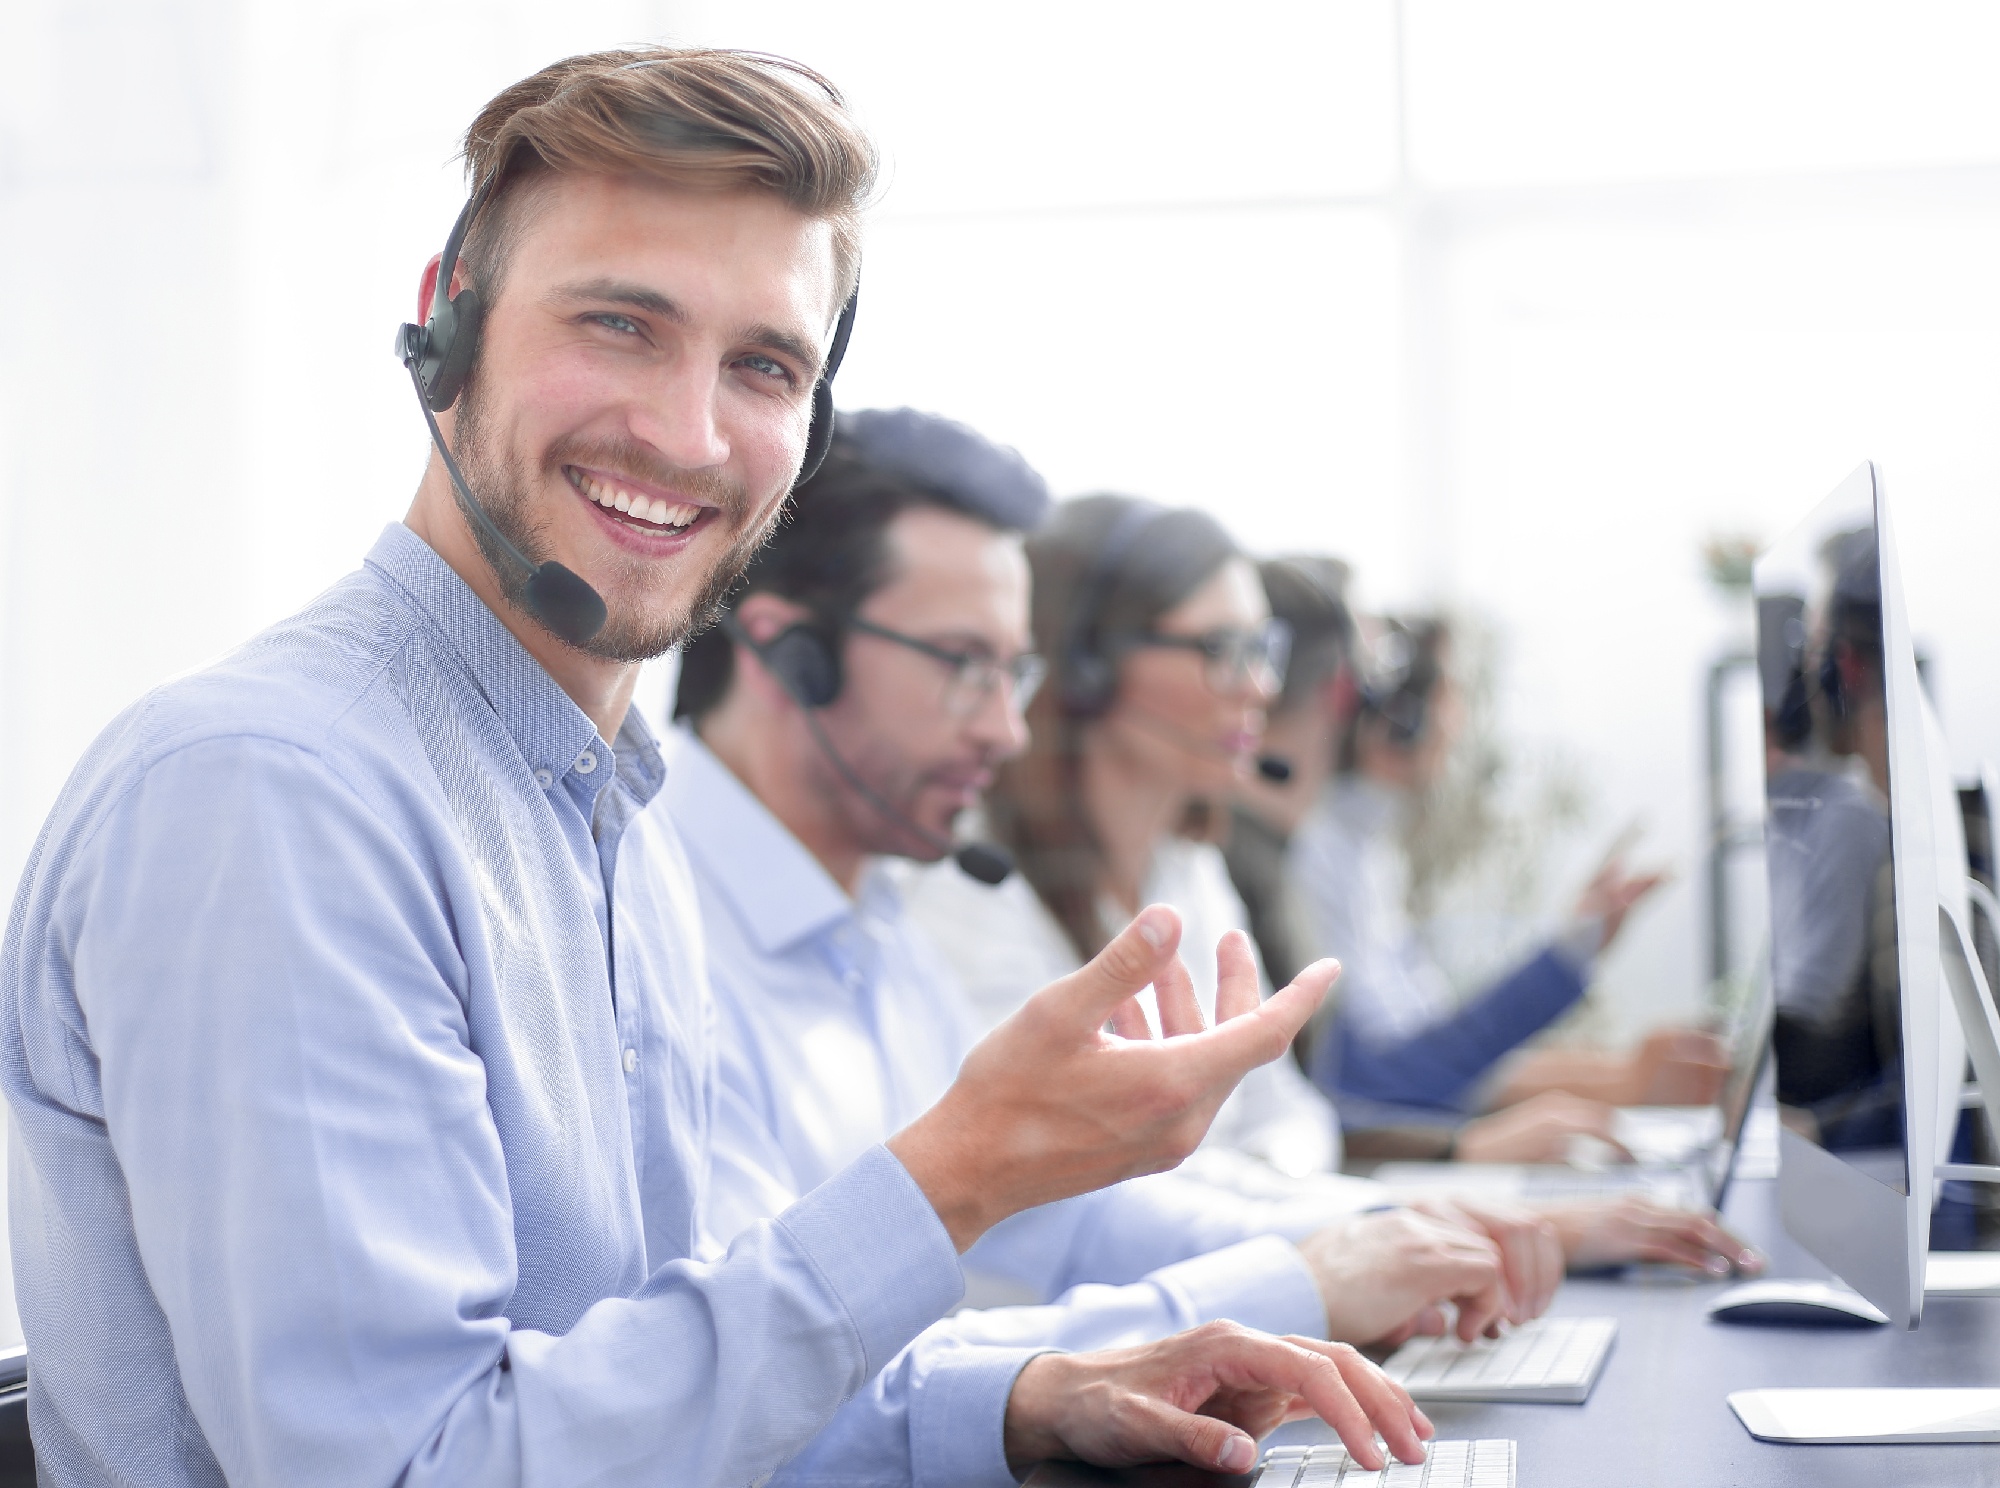 Customer Service Agent smiling with hand held up